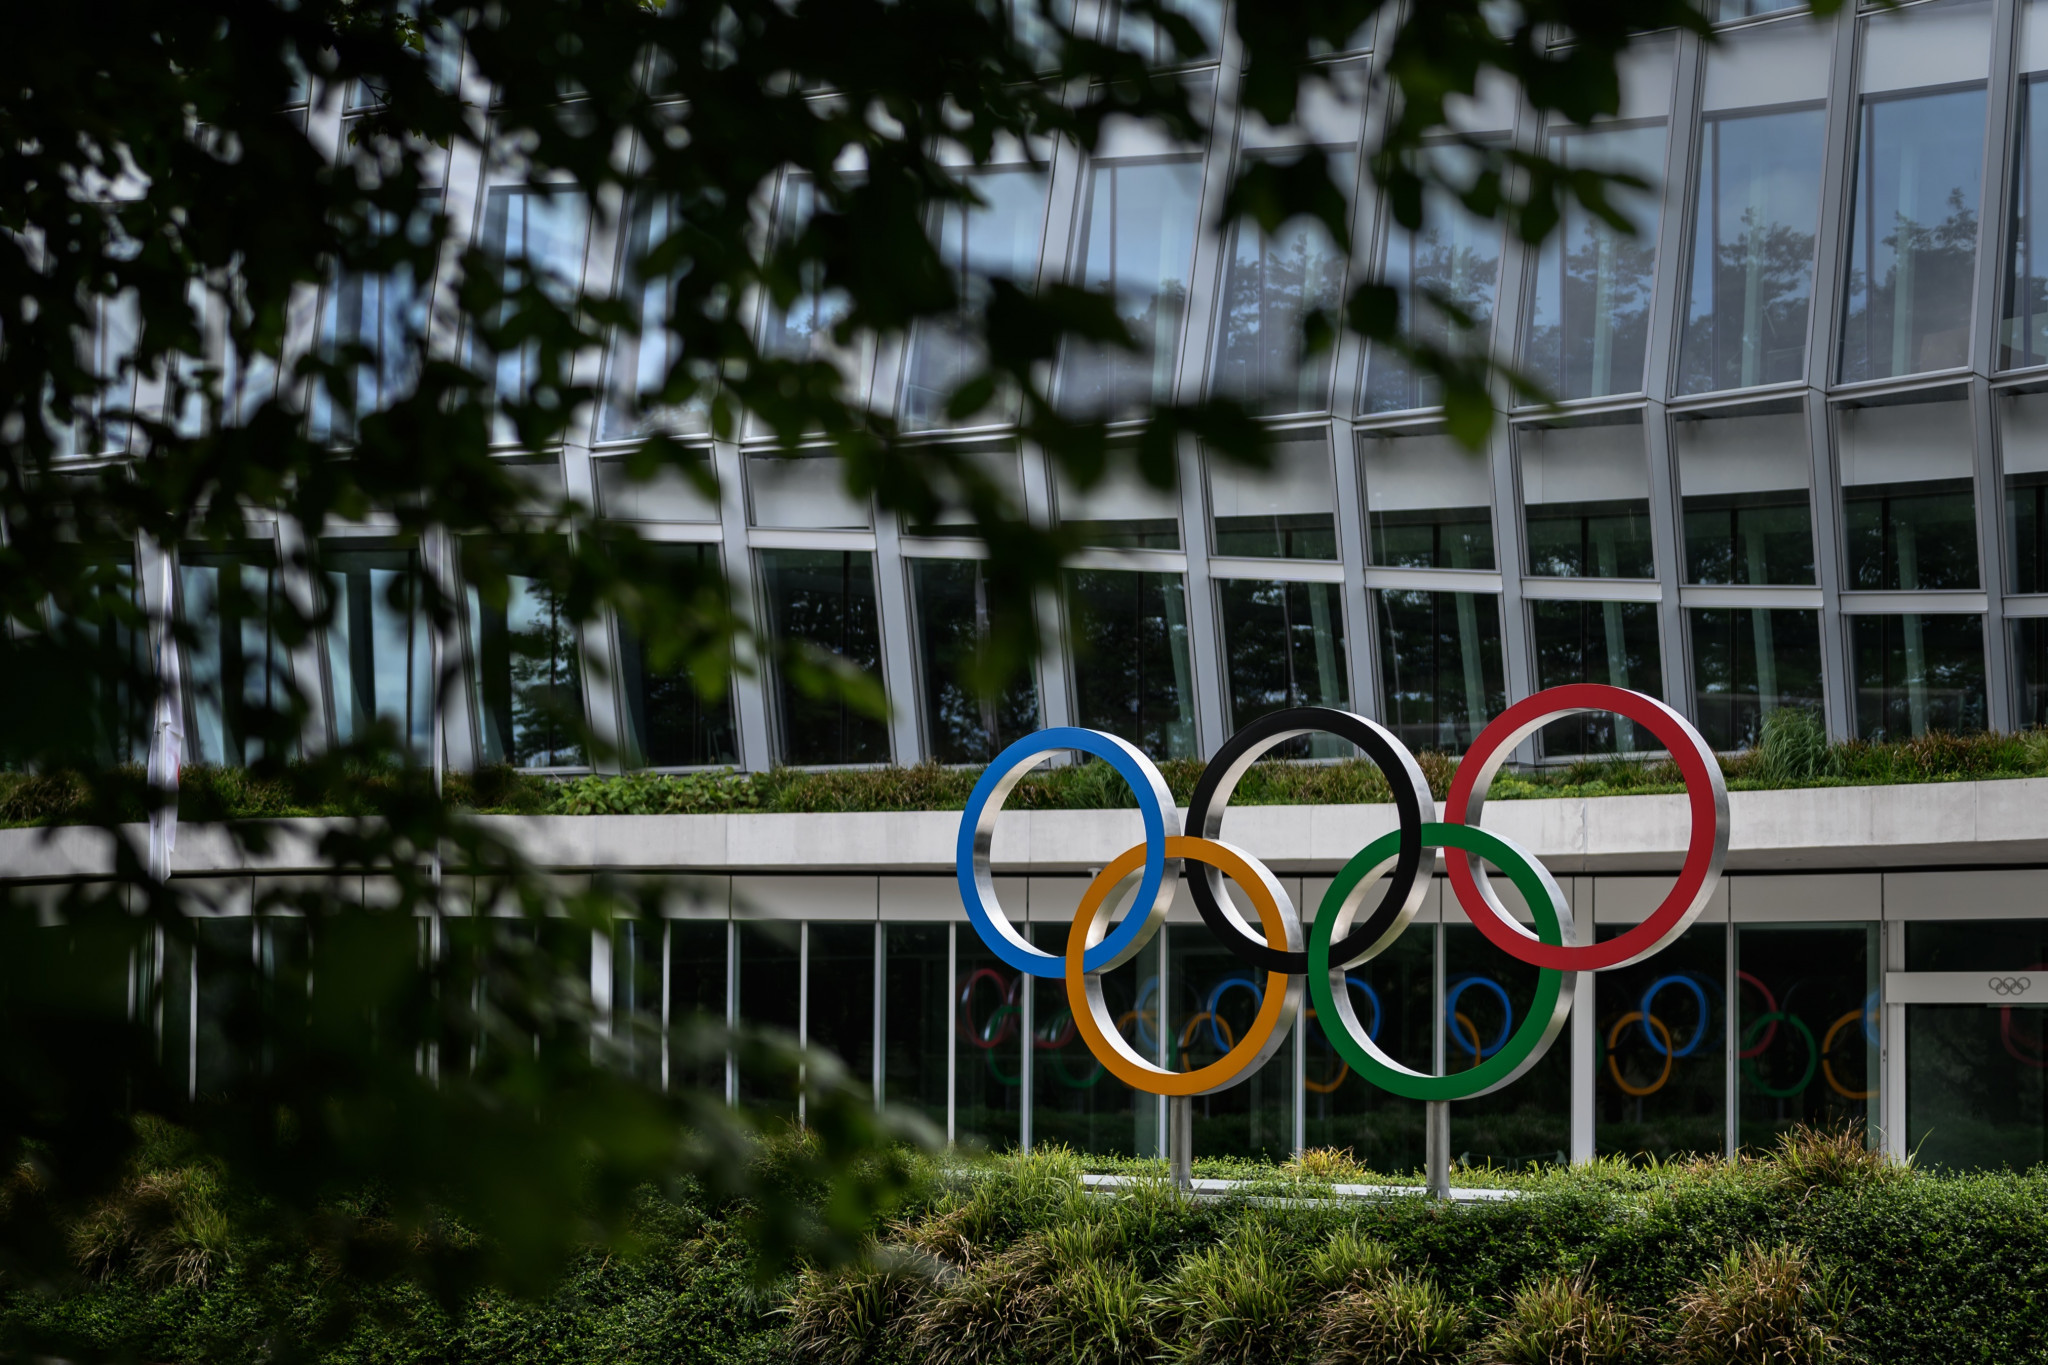 Paris 2024 and Olympic Qualifiers Series to be discussed by IOC Executive Board